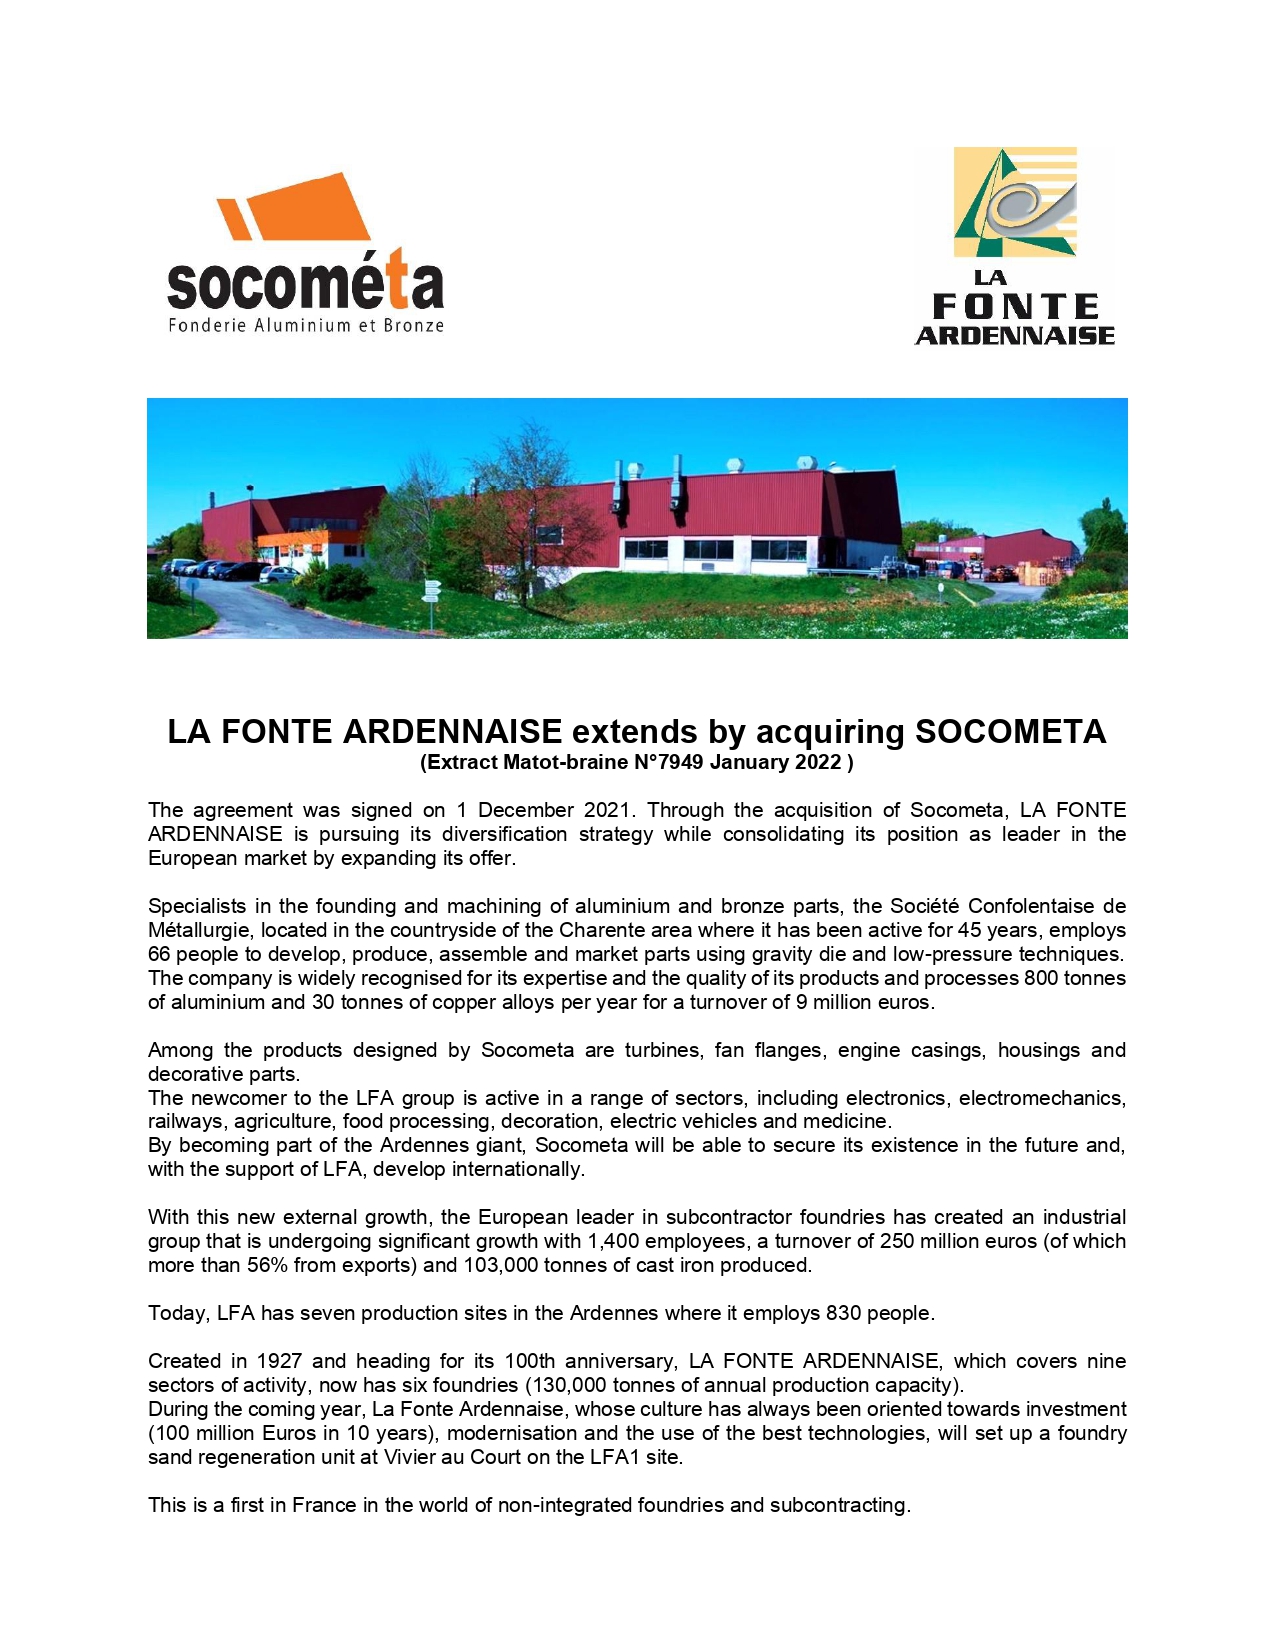 The agreement was signed on 1 December 2021. Through the acquisition of Socometa, LA FONTE ARDENNAISE is pursuing its diversification strategy while consolidating its position as leader in the European market by expanding its offer.